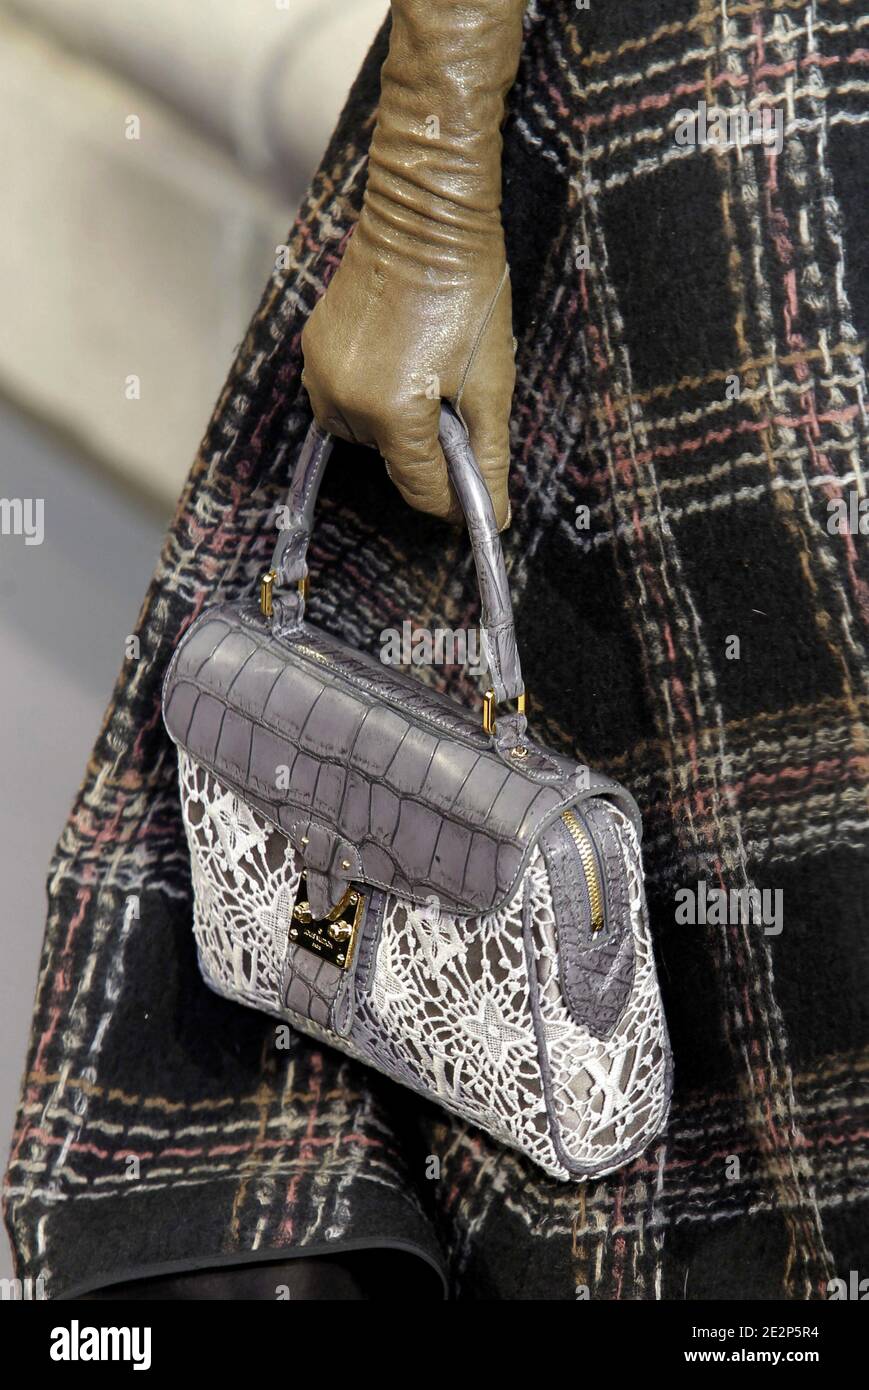 A model holds a handbag designed by Marc Jacobs for Louis Vuitton  Fall-Winter 2010/2011 Ready-to-Wear collection show held at the Cour Carre  du Louvre in Paris, France on March 10, 2010. Photo